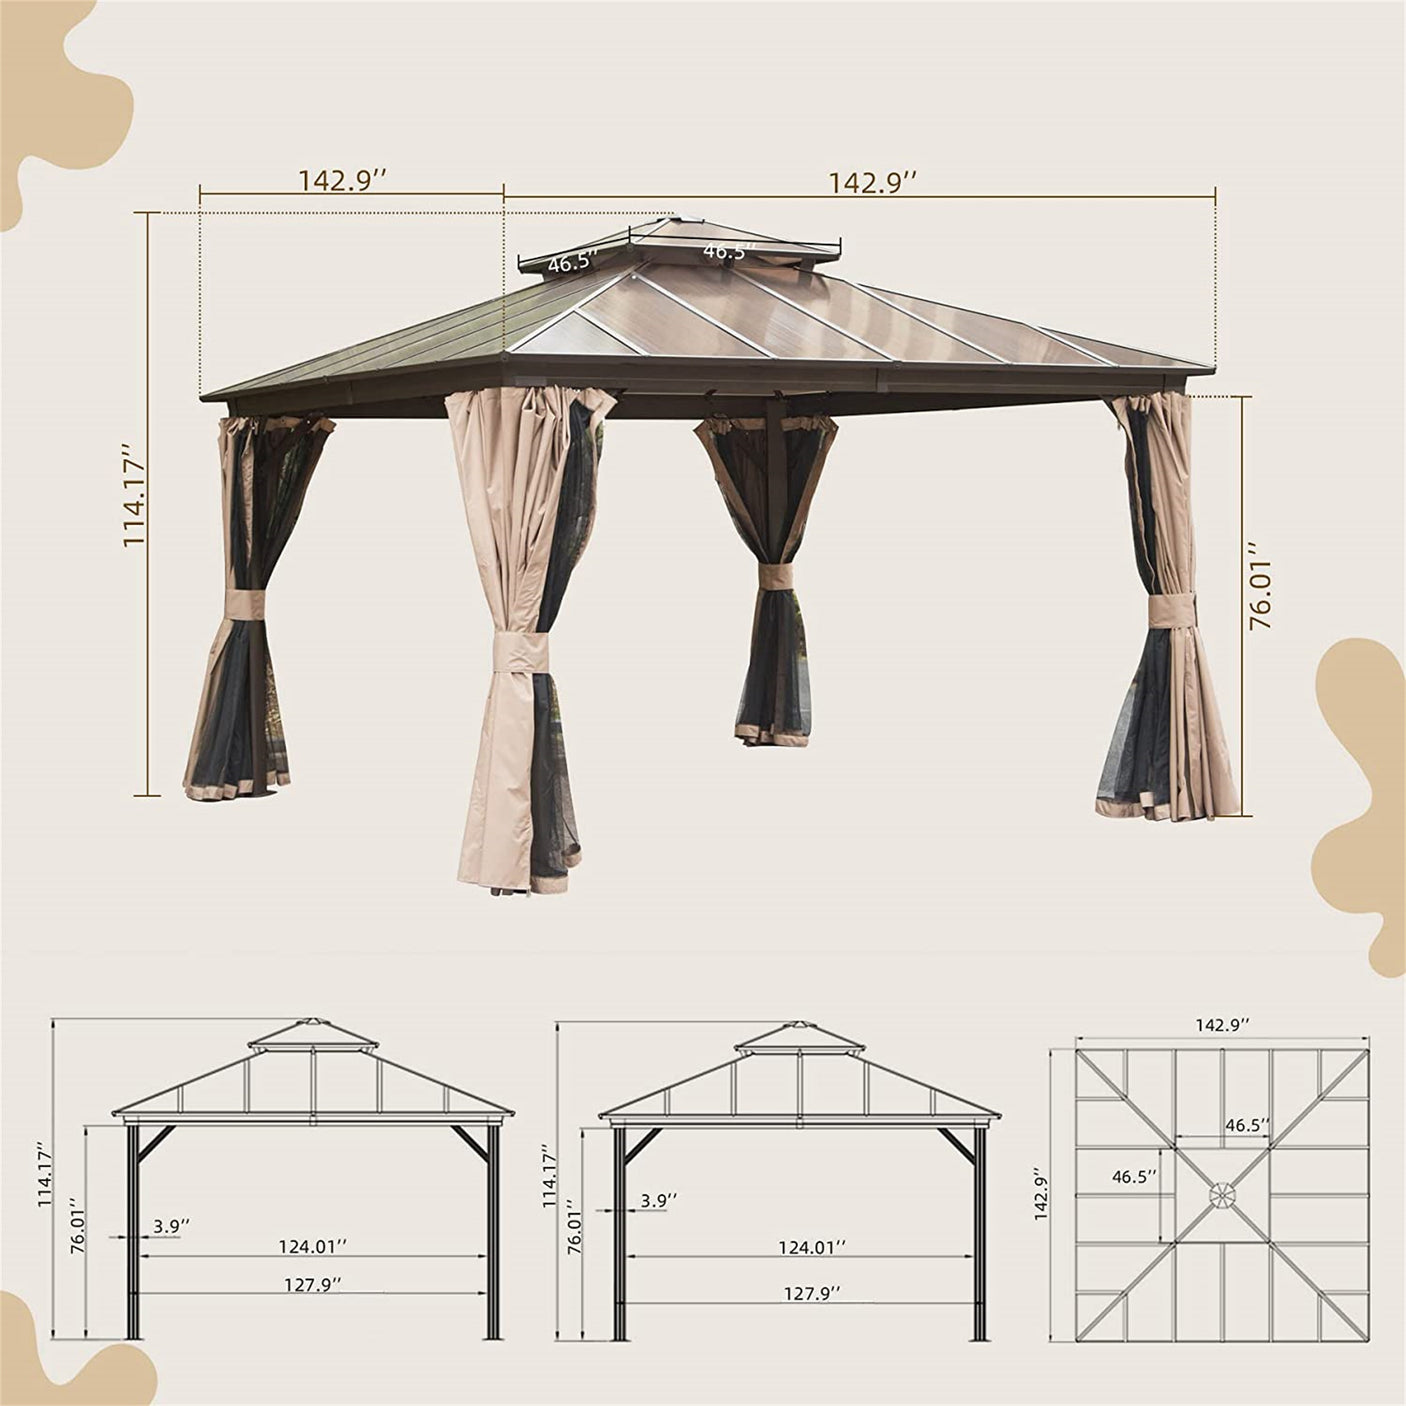 12'x12' Hardtop Gazebo, Permanent Outdoor Gazebo with Polycarbonate Double Roof, Aluminum Gazebo Pavilion with Curtain and Net for Garden, Patio, Lawns, Deck, Backyard(Brown)